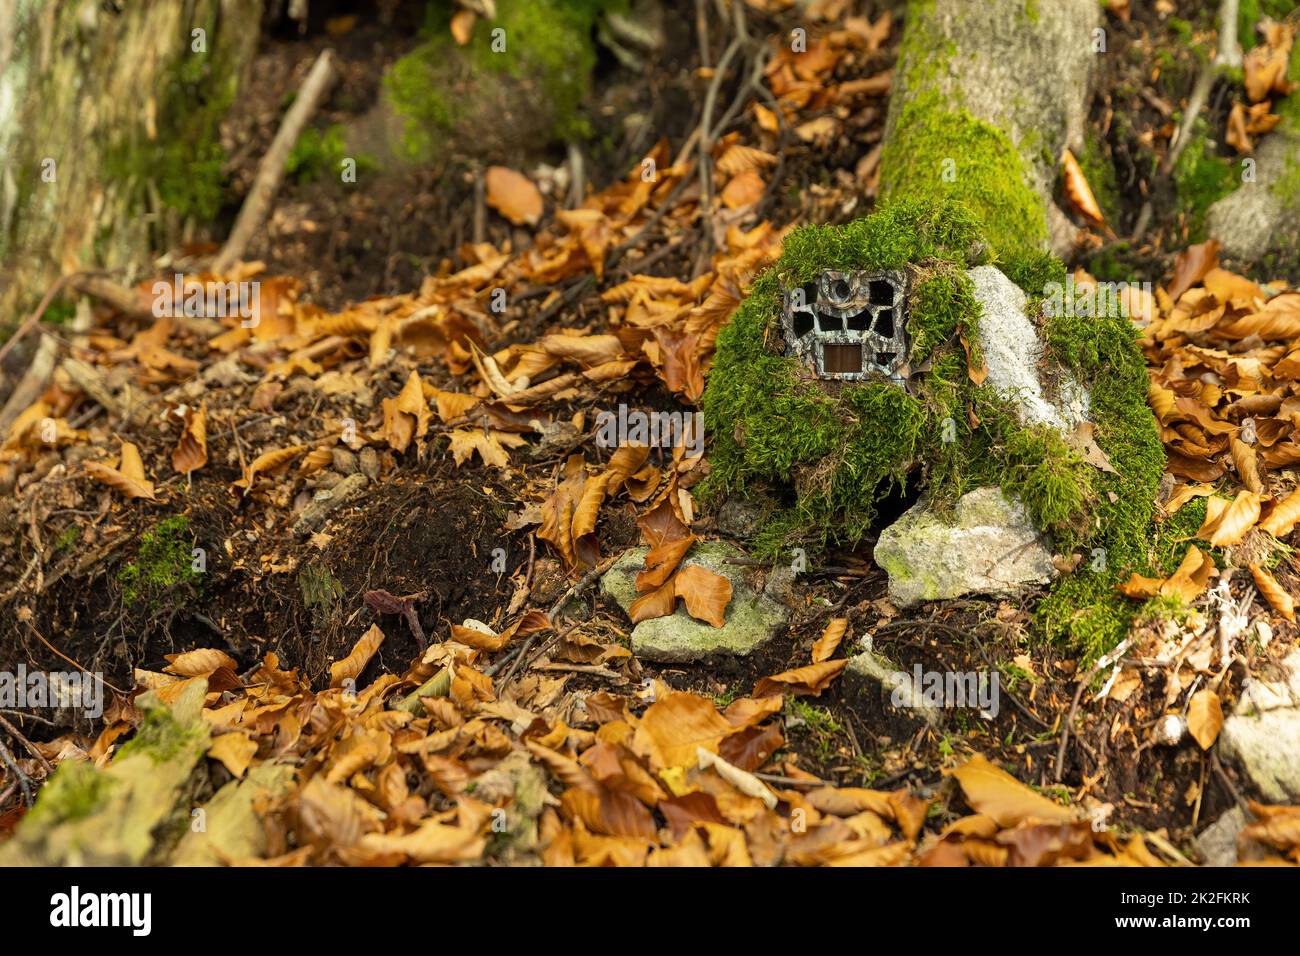 Camouflaged trail camera hidden on a tree under green moss in autumn nature Stock Photo